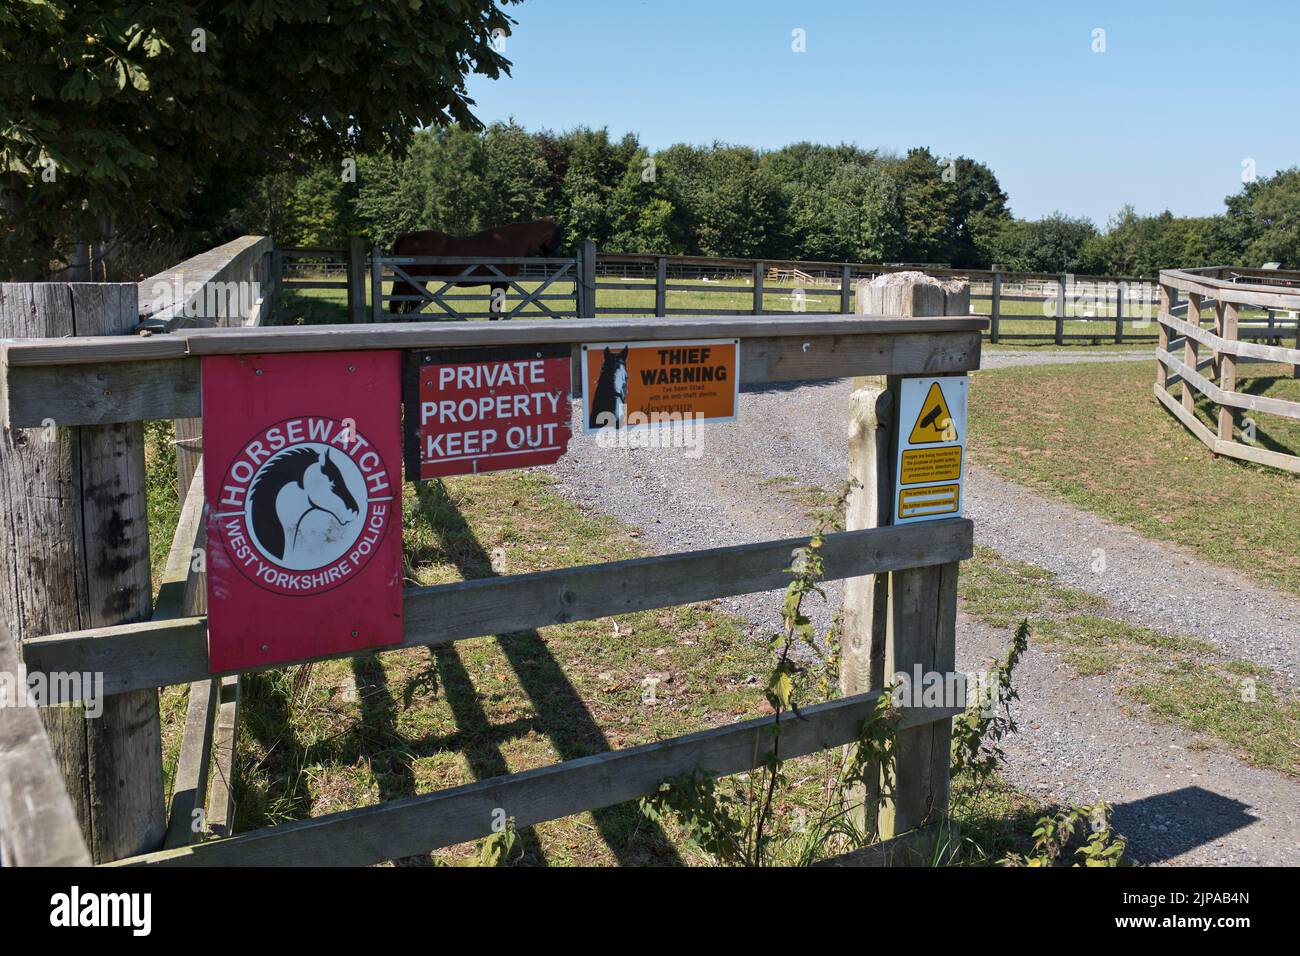 dh Horses stables CLIFFORD YORKSHIRE Private property keep out signs horsewatch sign security Stock Photo